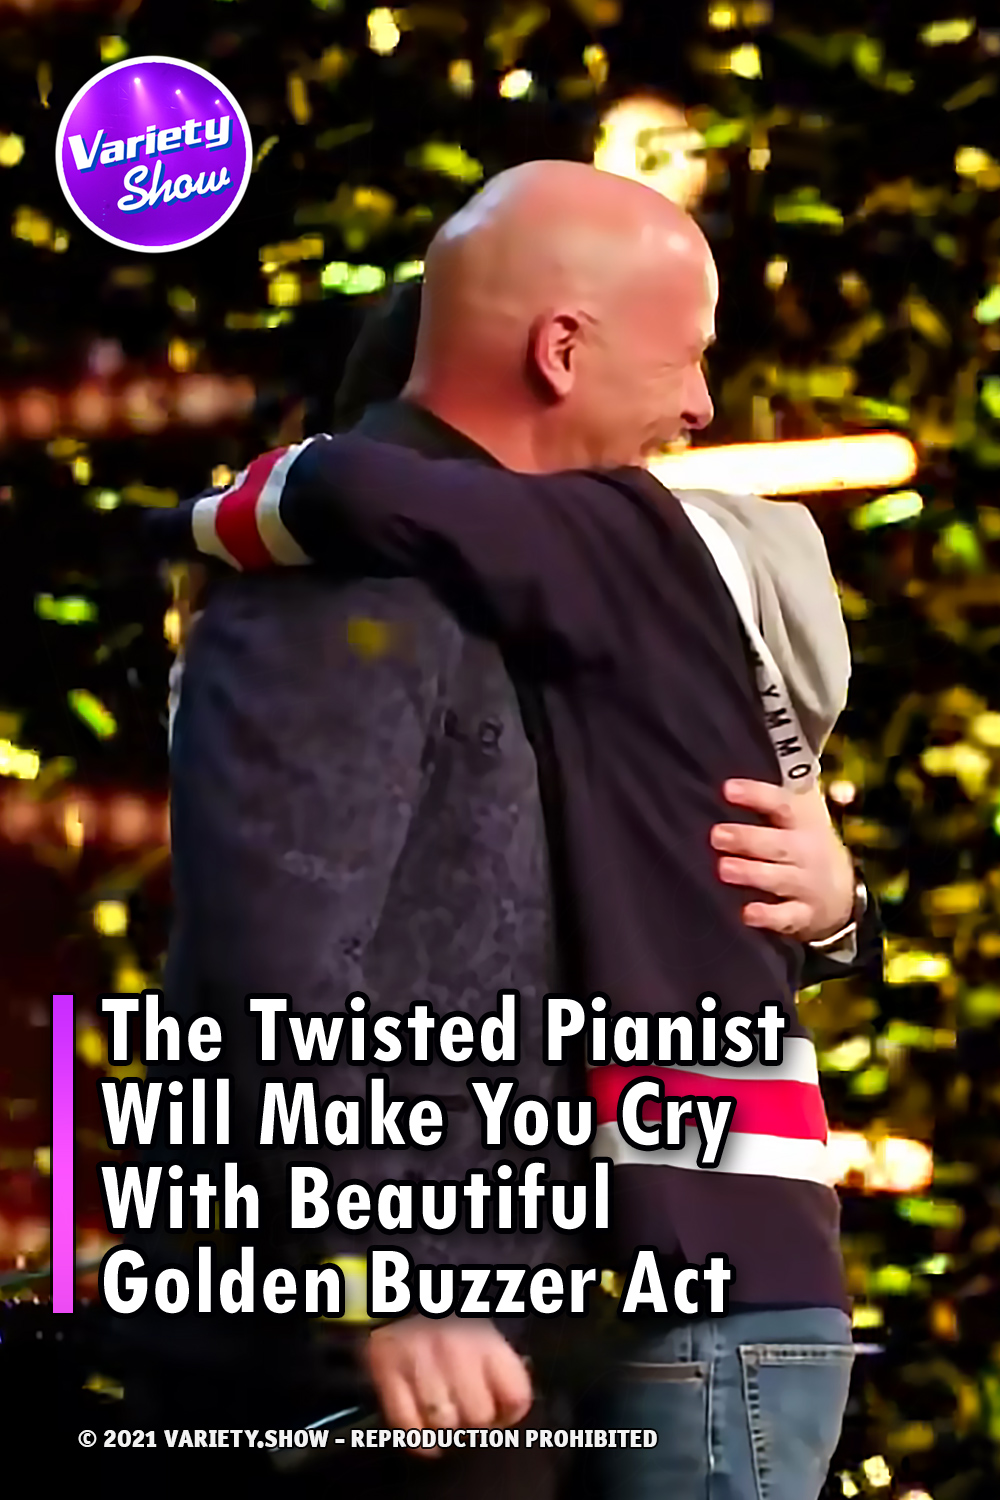 The Twisted Pianist Will Make You Cry With Beautiful Golden Buzzer Act